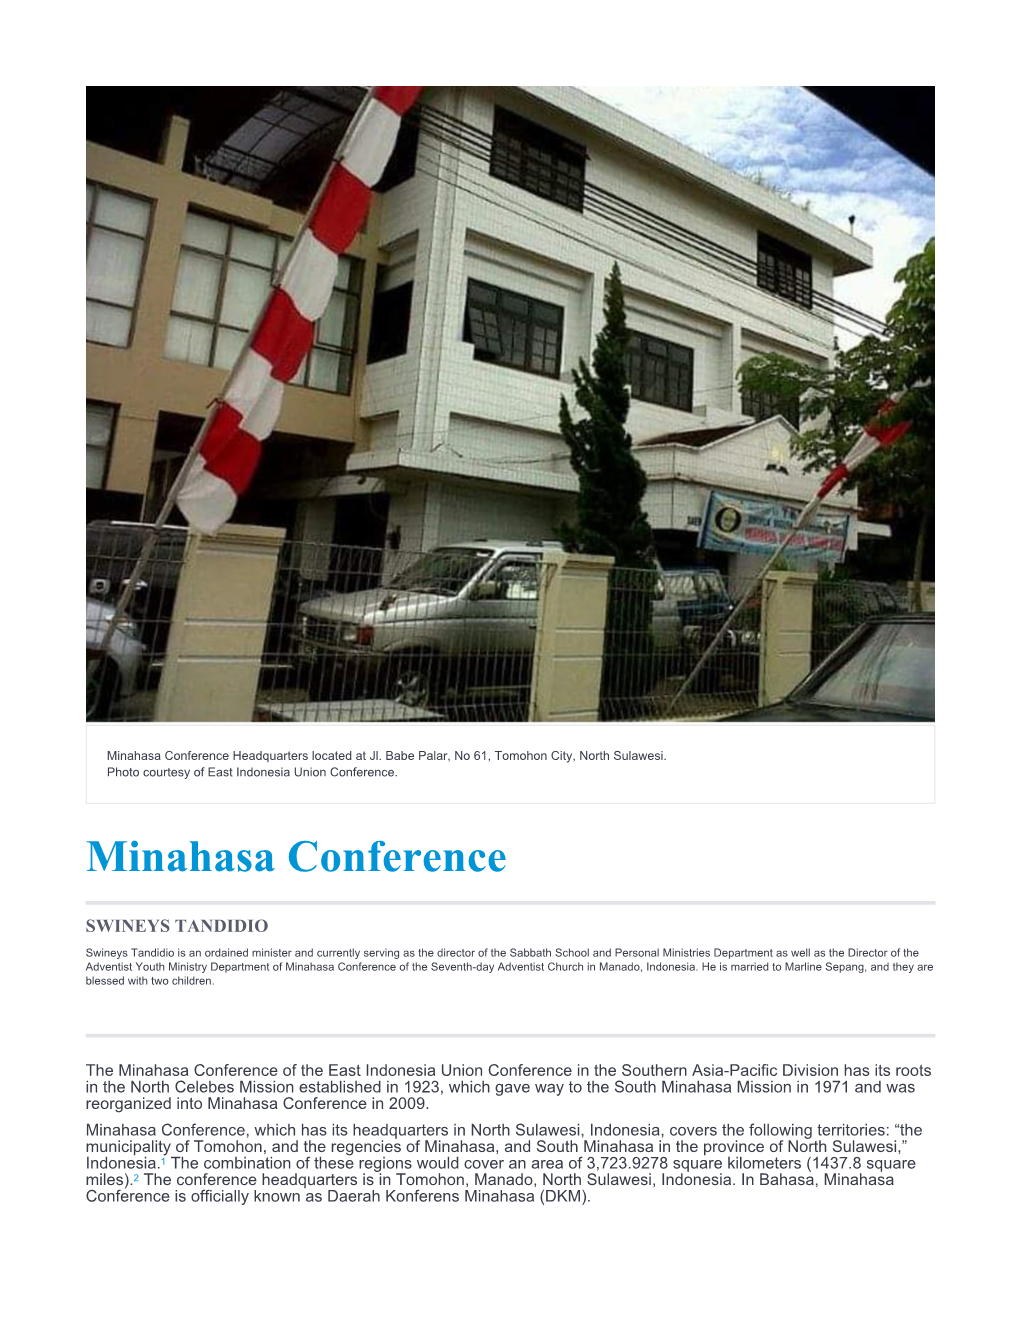 Minahasa Conference Headquarters Located at Jl